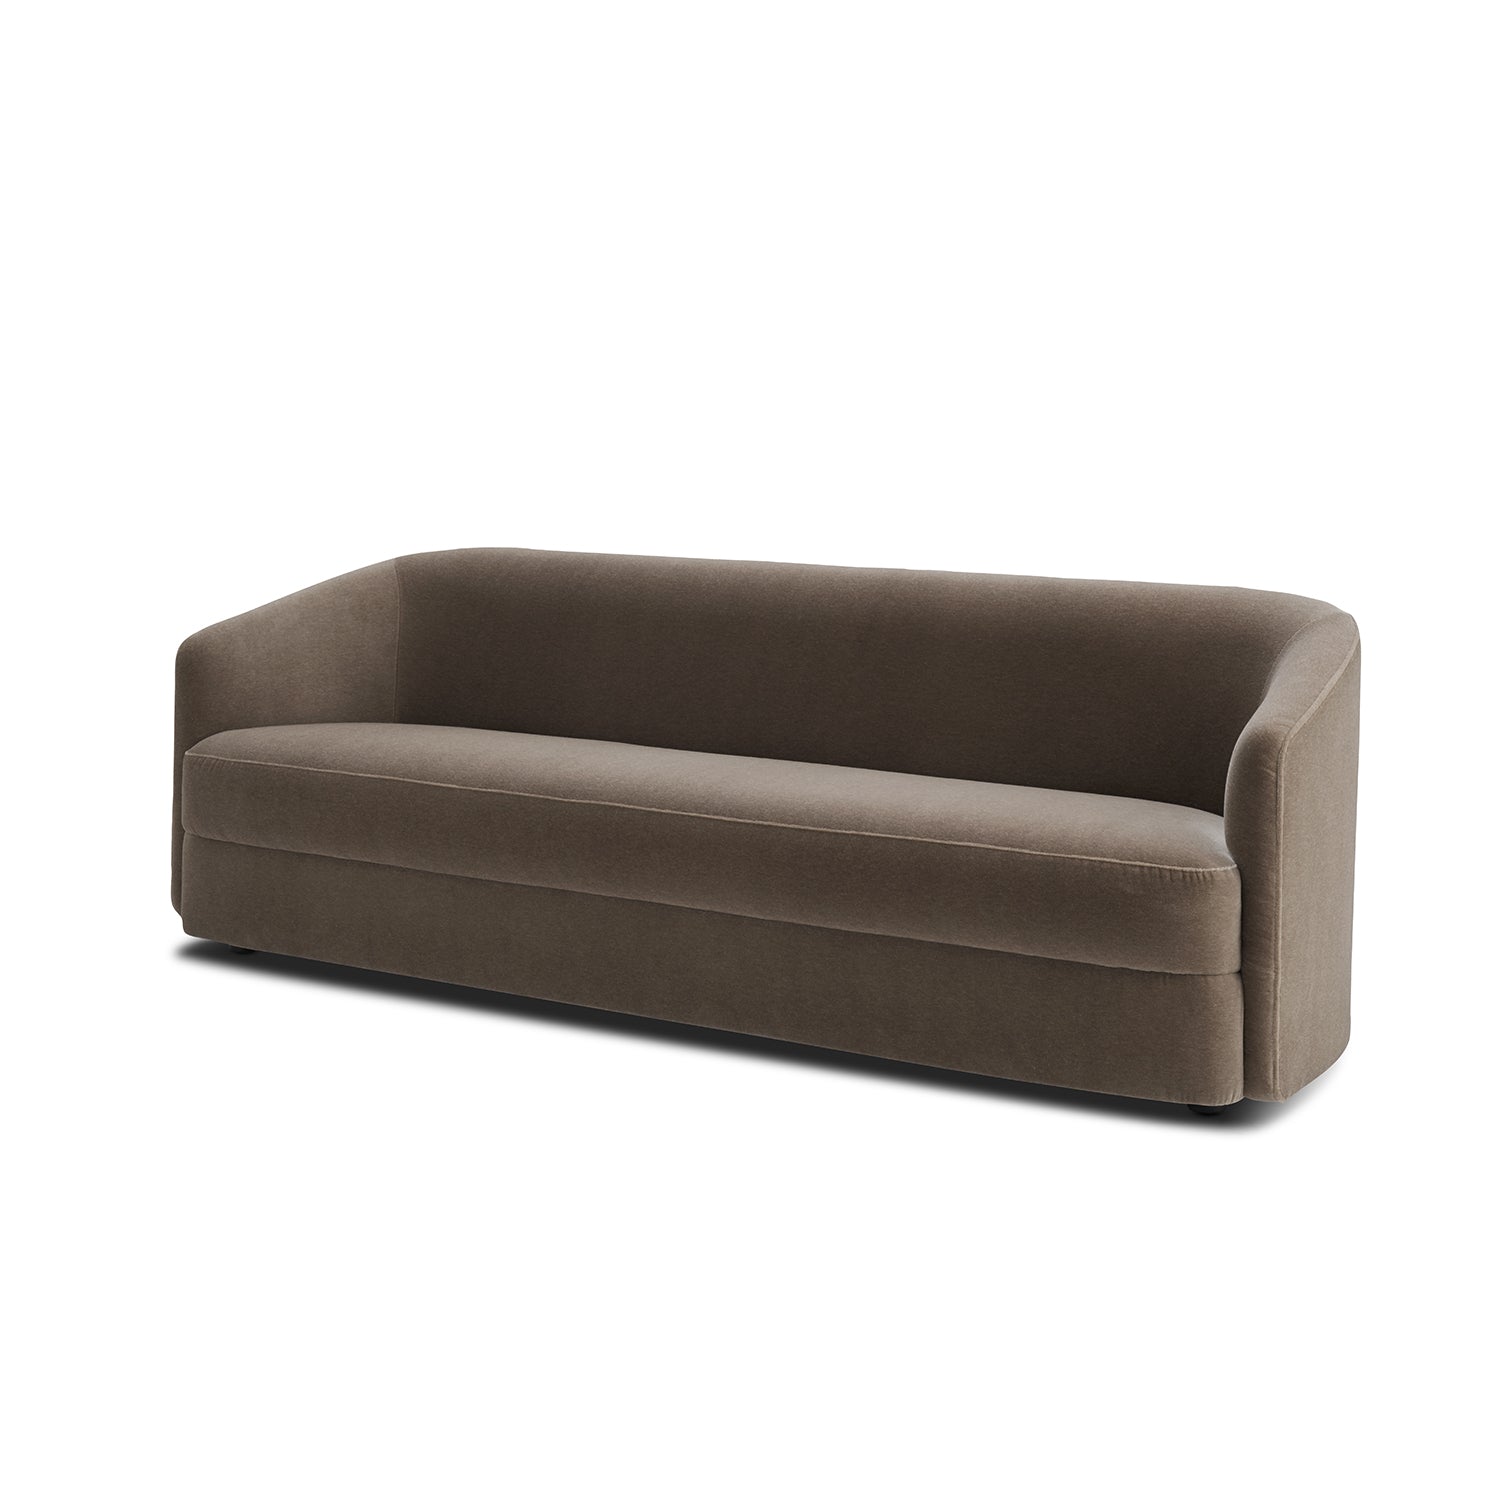 Covent 3 Seater Sofa - The Design Choice